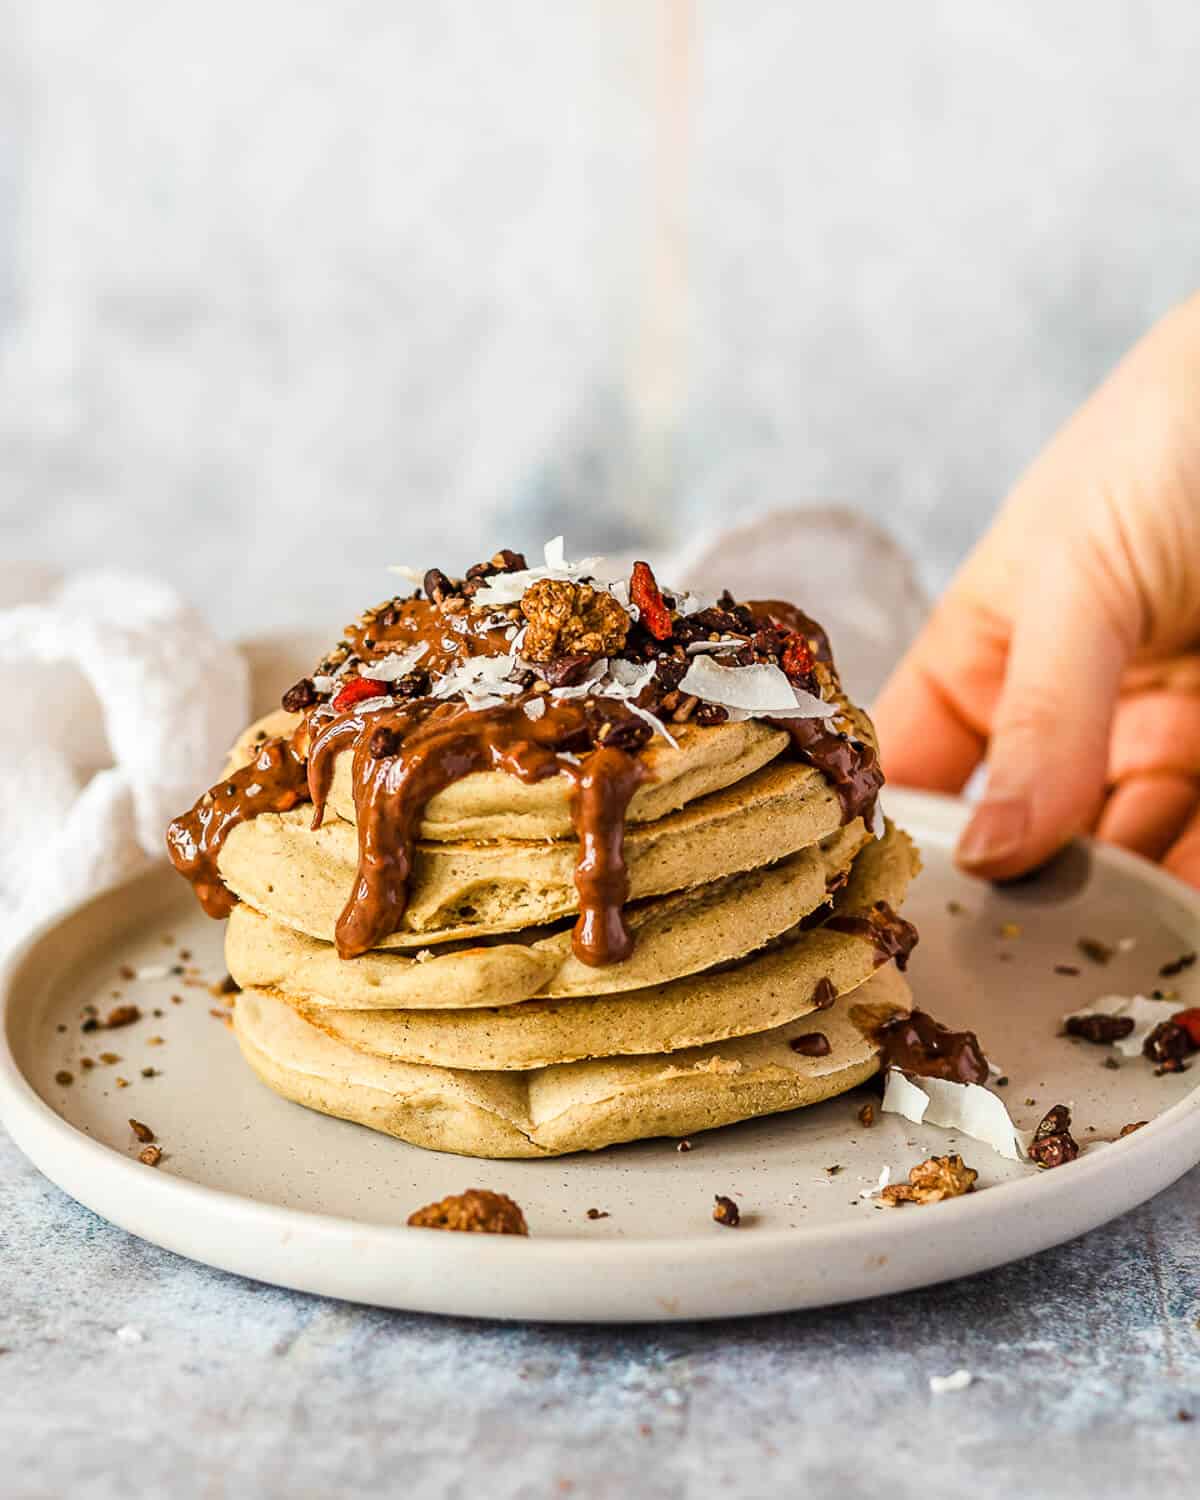 A stack of 5 vegan buckwheat pancakes on a grey plate. On top of the pancakes there is some cacao hazelnut butter, coconut chips and various seeds. There is a hand holding the plate.